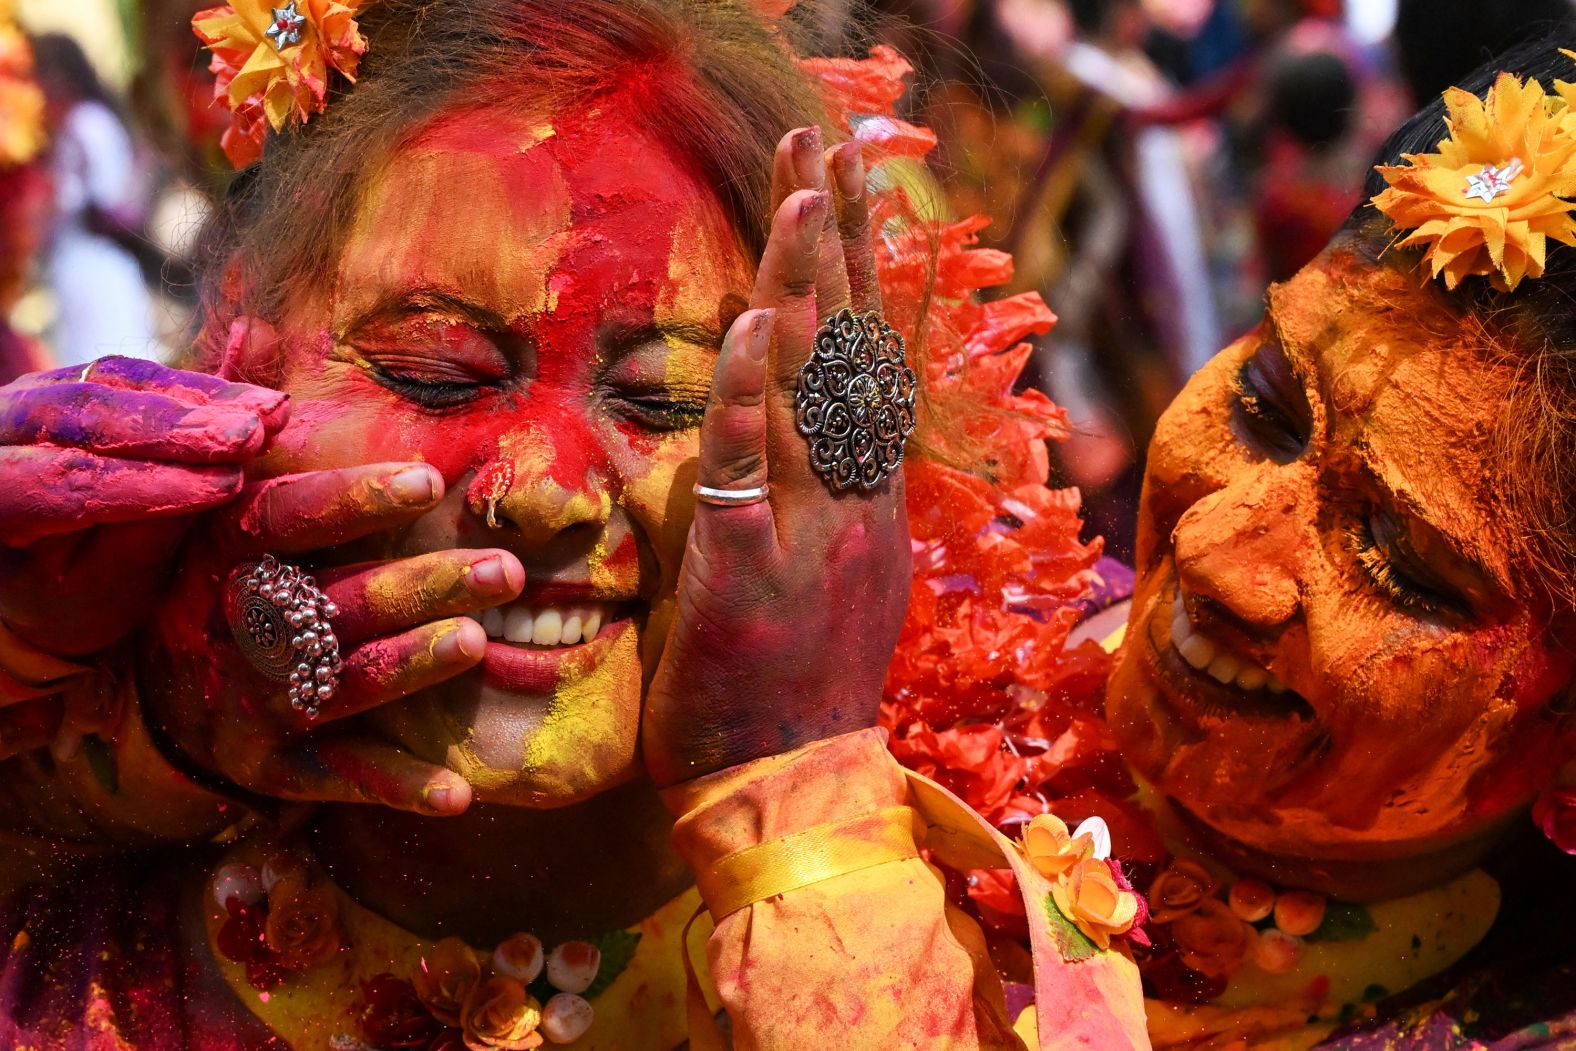 Women are smeared with colored powder as they celebrate Holi, <a href="index.php?page=&url=https%3A%2F%2Fwww.cnn.com%2F2023%2F03%2F07%2Fworld%2Fholi-2023-celebration-photos-cec%2Findex.html" target="_blank">the Hindu festival of love, color and spring</a>, in Kolkata, India, on Monday, March 25.